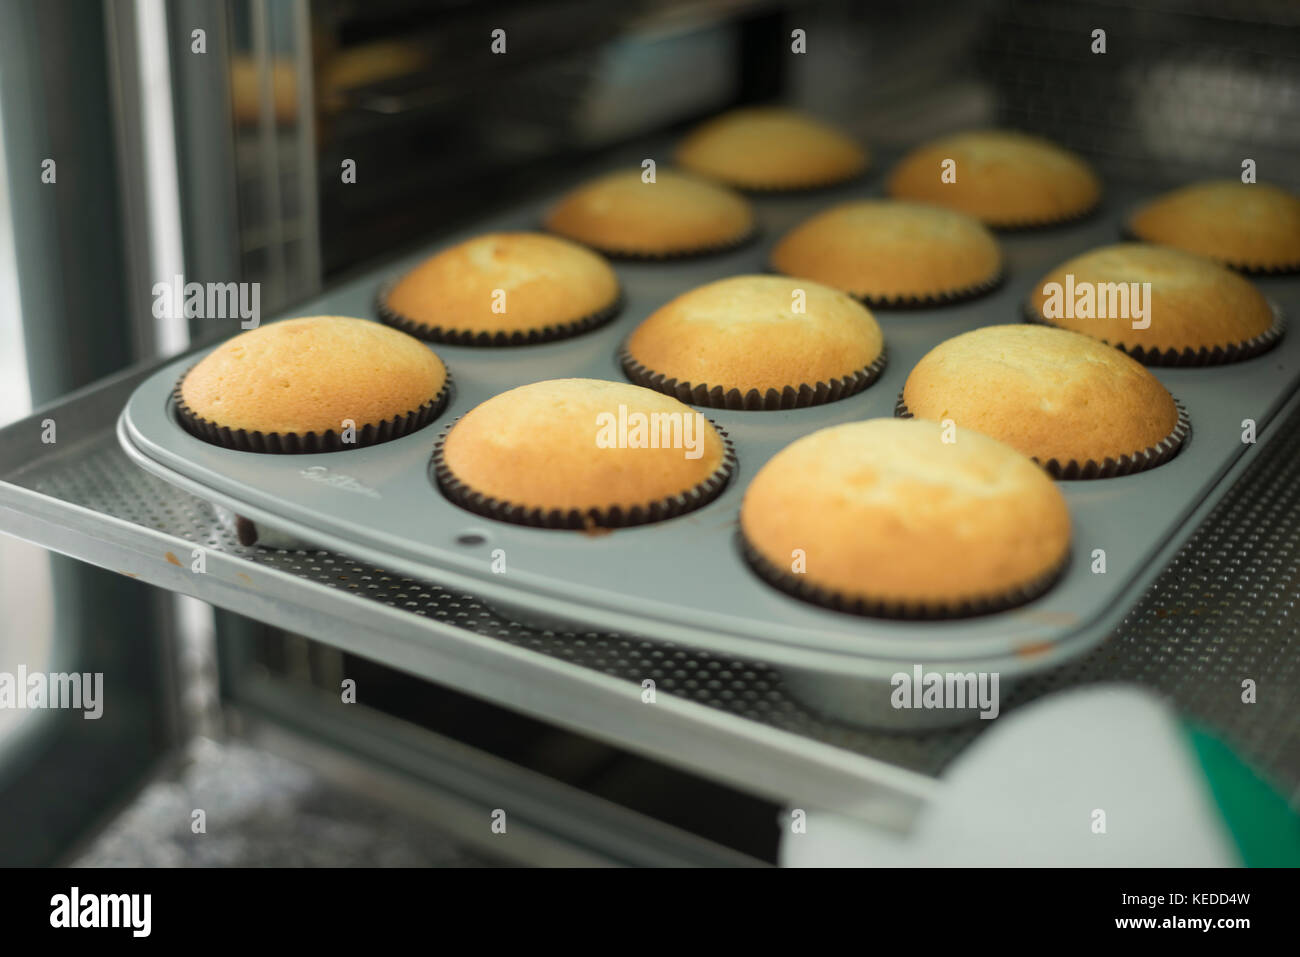 Cupcakes coming out of the oven Stock Photo